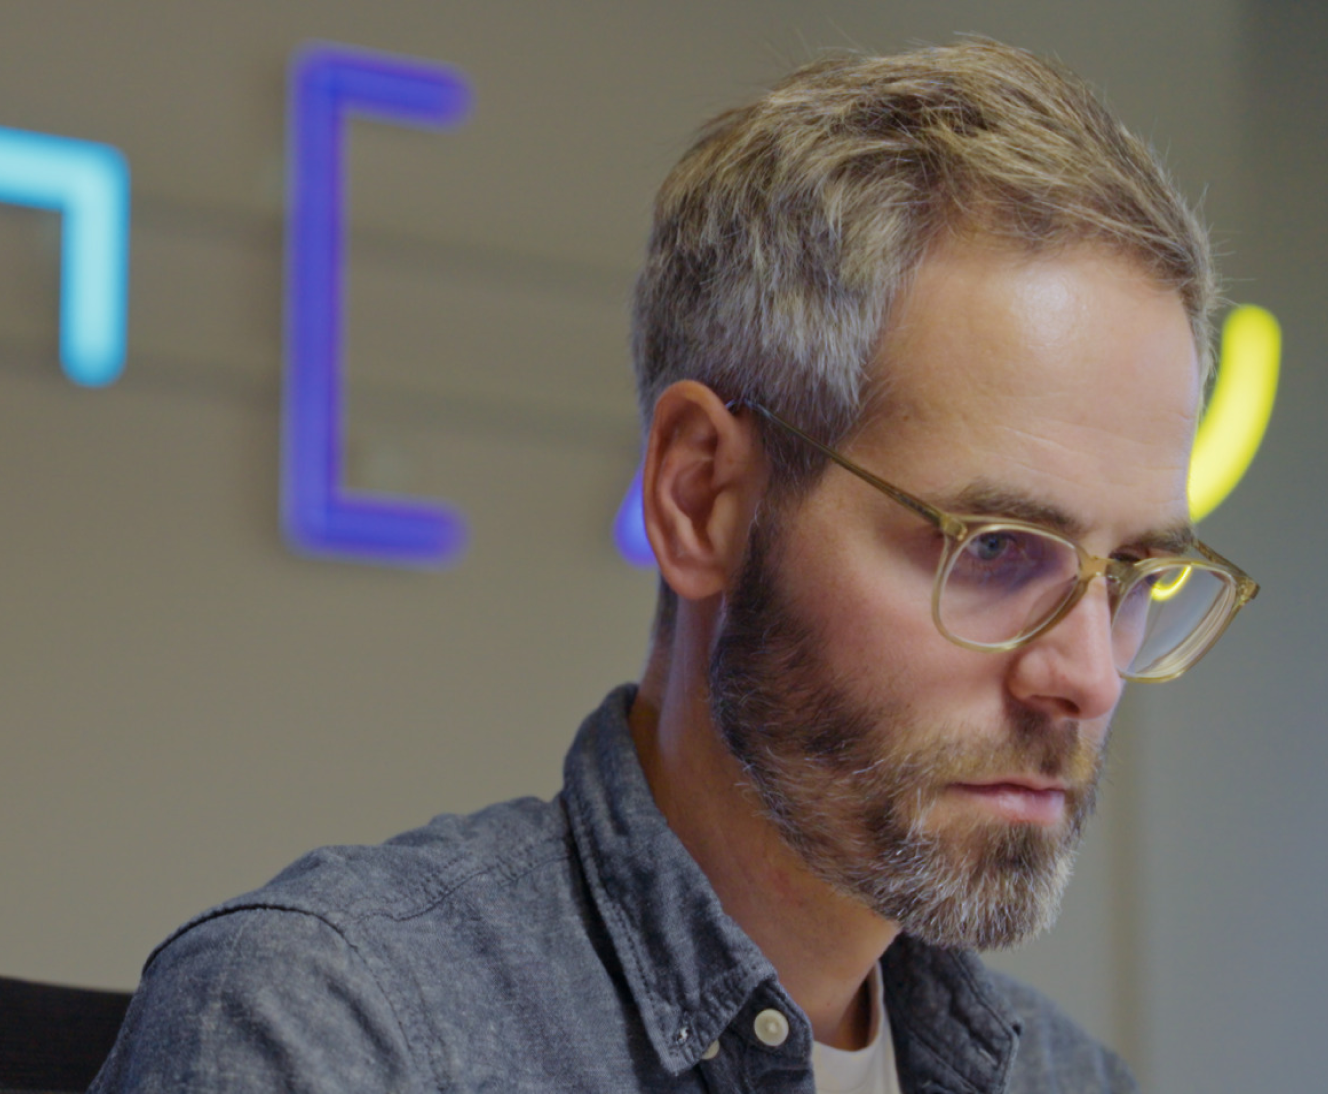 A man with a beard and glasses, focusing intently on a computer screen in an office with neon lights in the background.